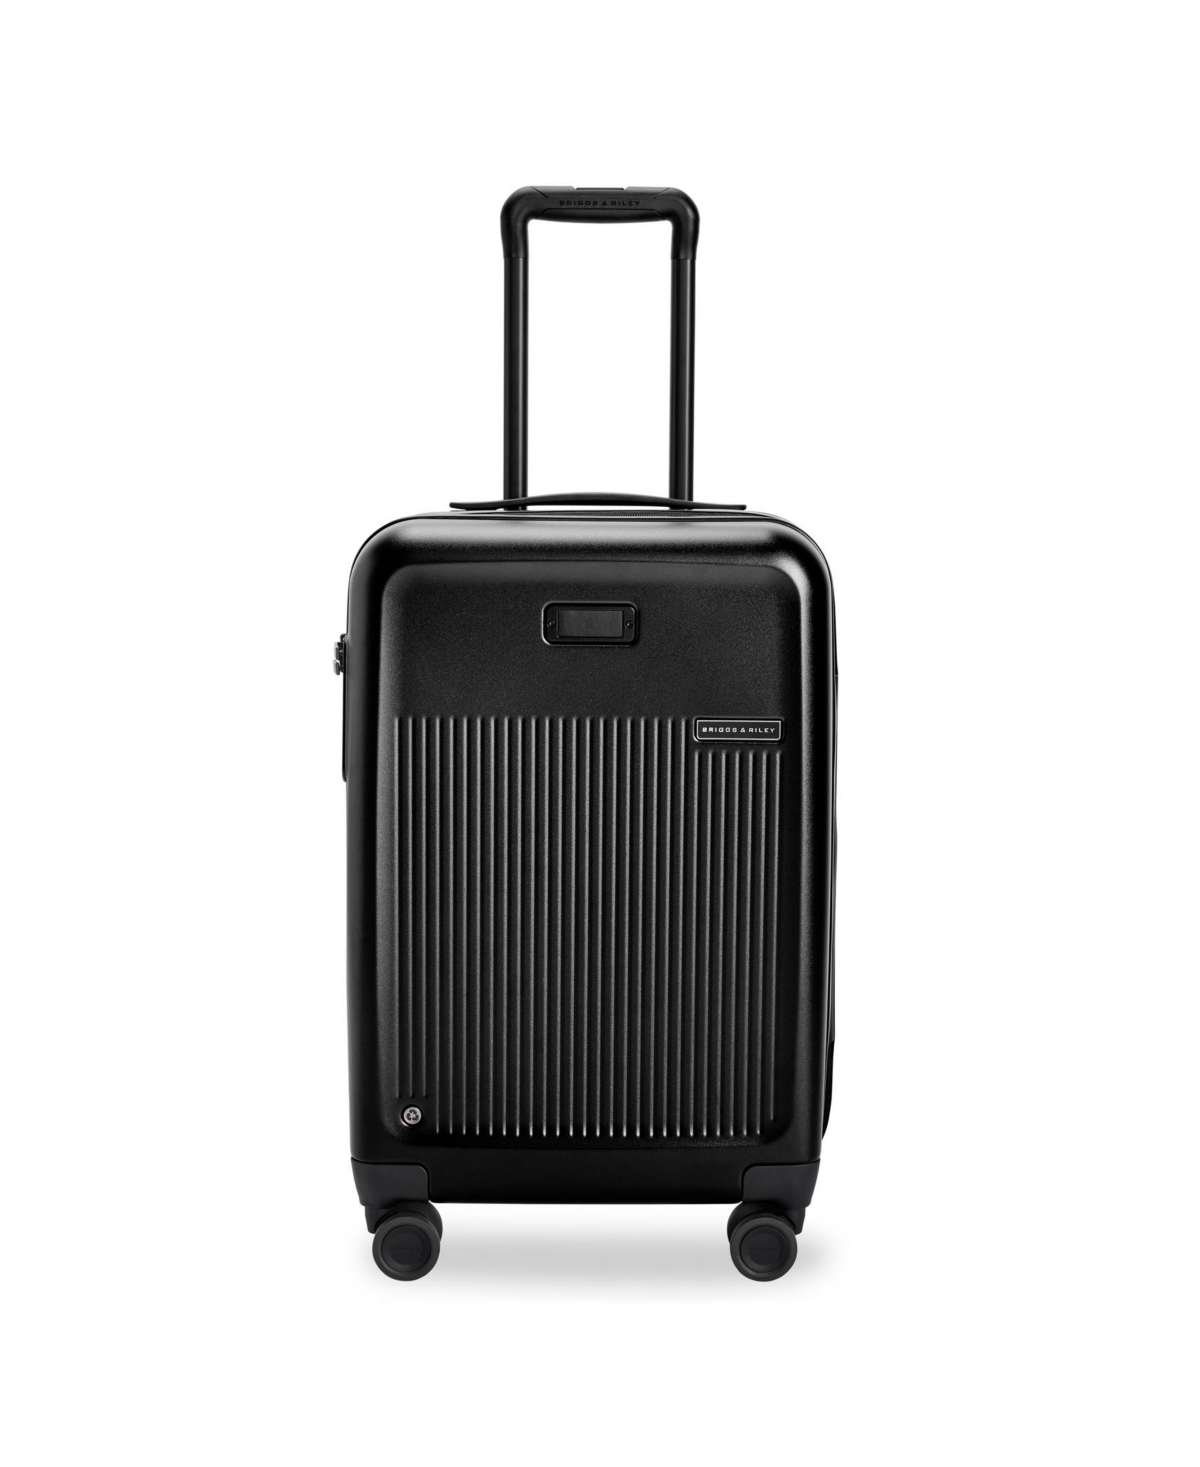 Briggs & Riley Sympatico 3.0 Global Carry-on Expandable Spinner In Black